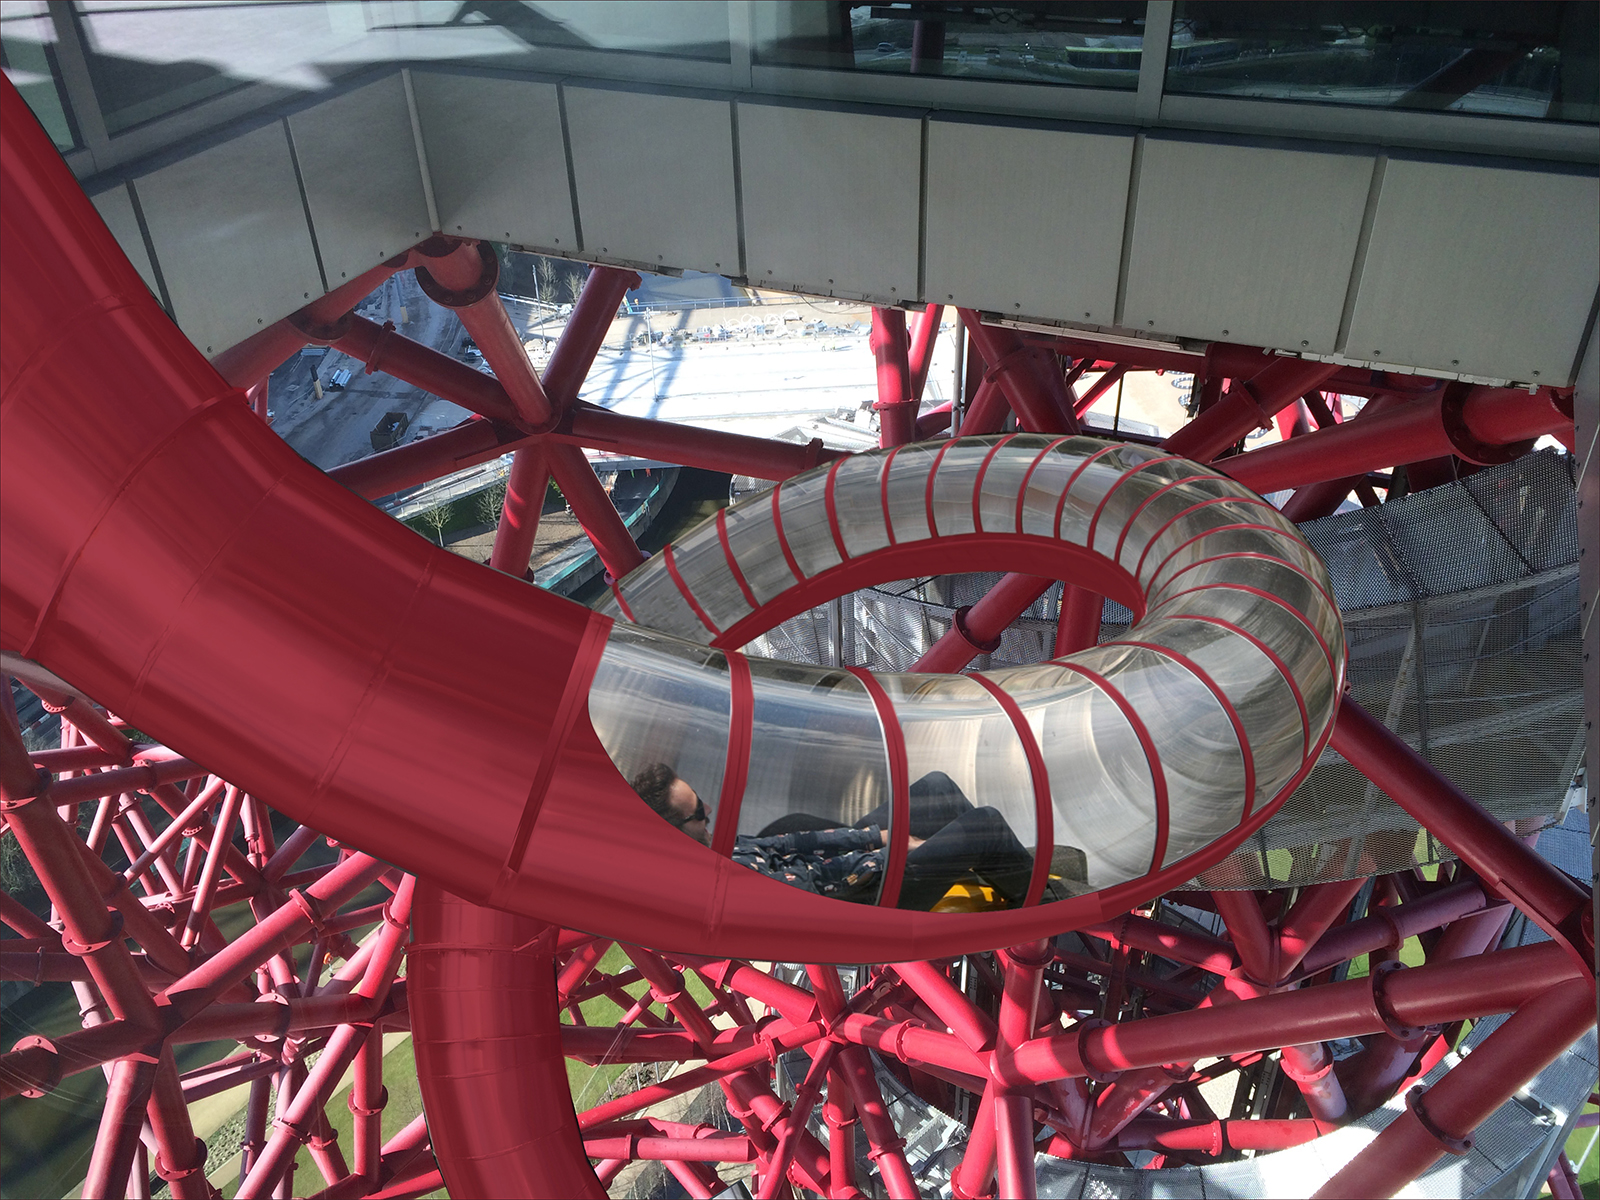 The Slide at ArcelorMittal Orbit Tower